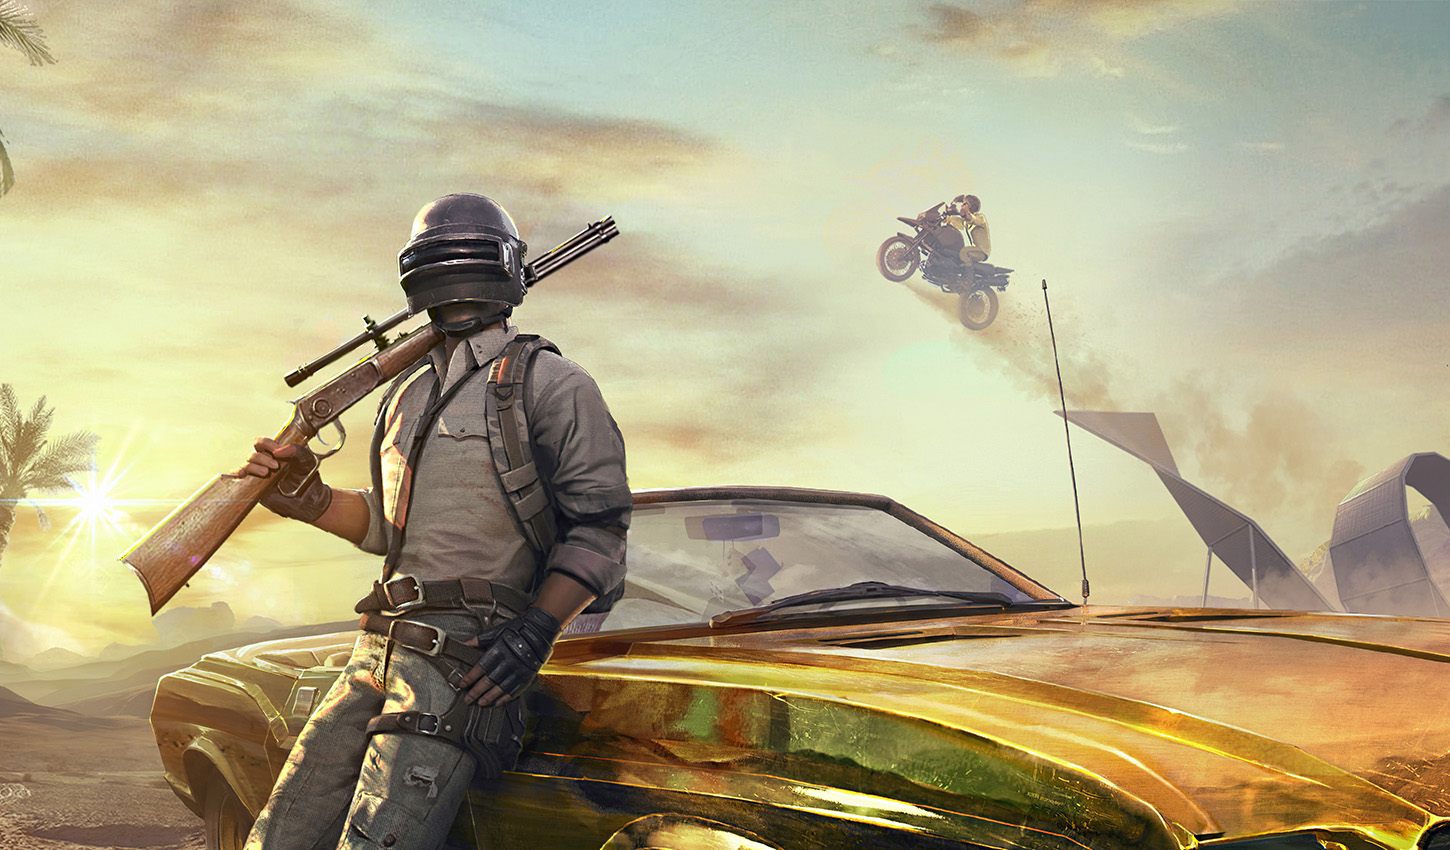 “Full 4K Collection of Amazing PUBG Mobile Images: Over 999+”